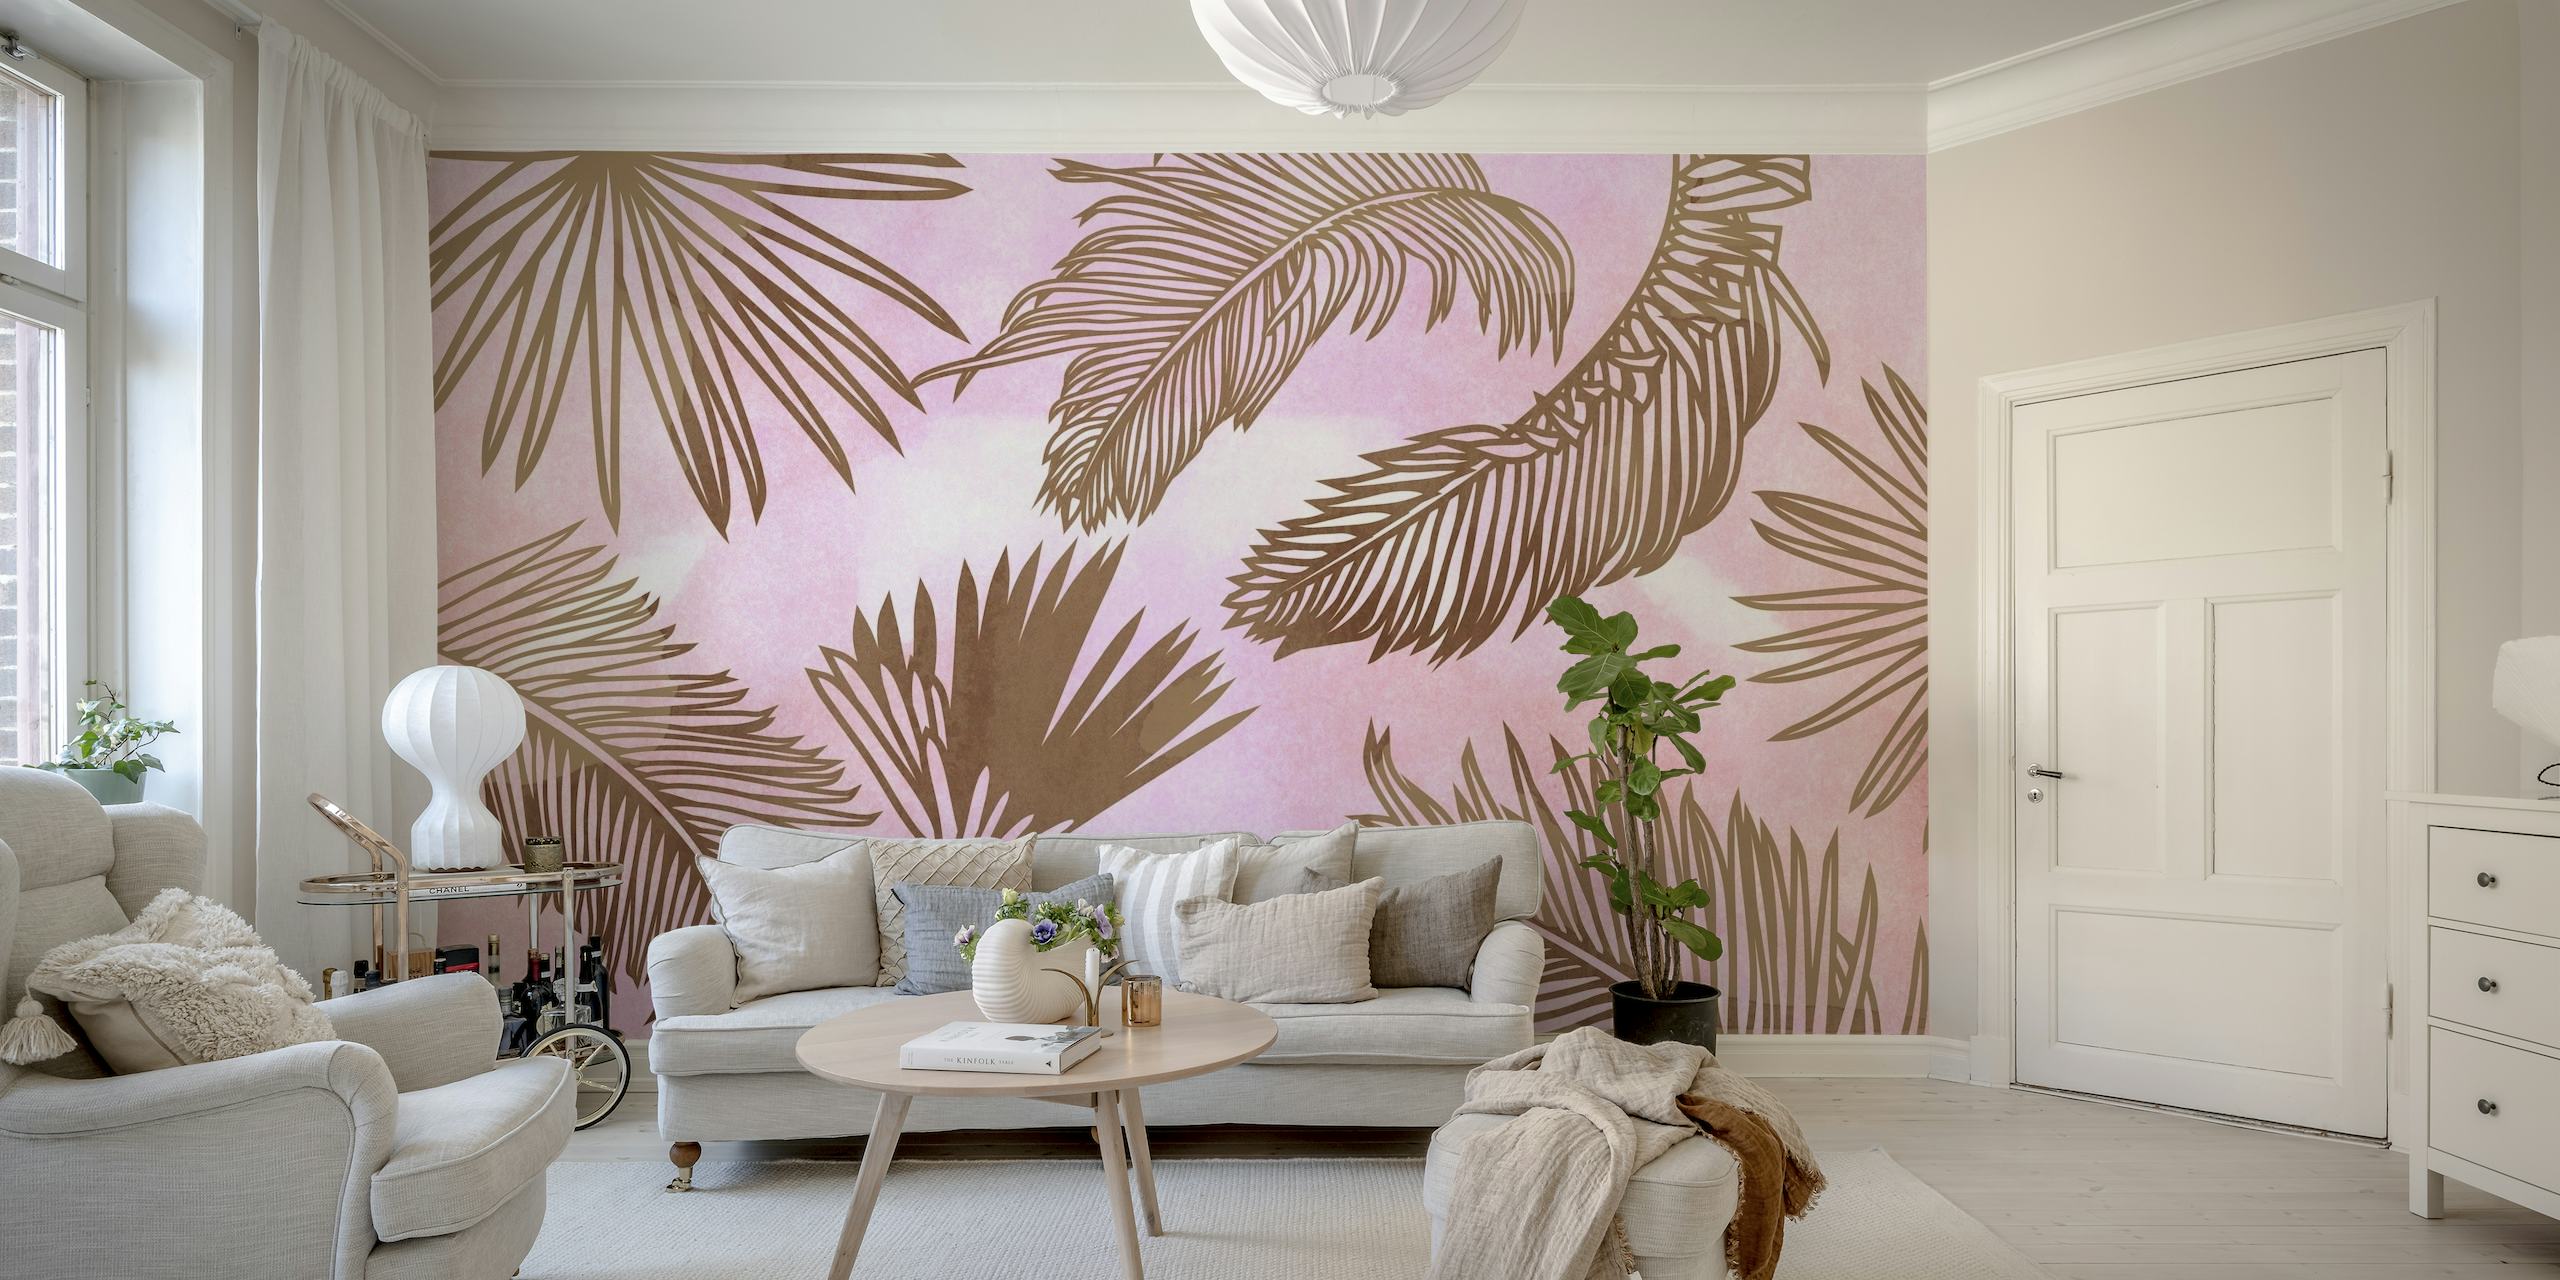 pastel-colored jungle-themed wall mural with watercolor effect